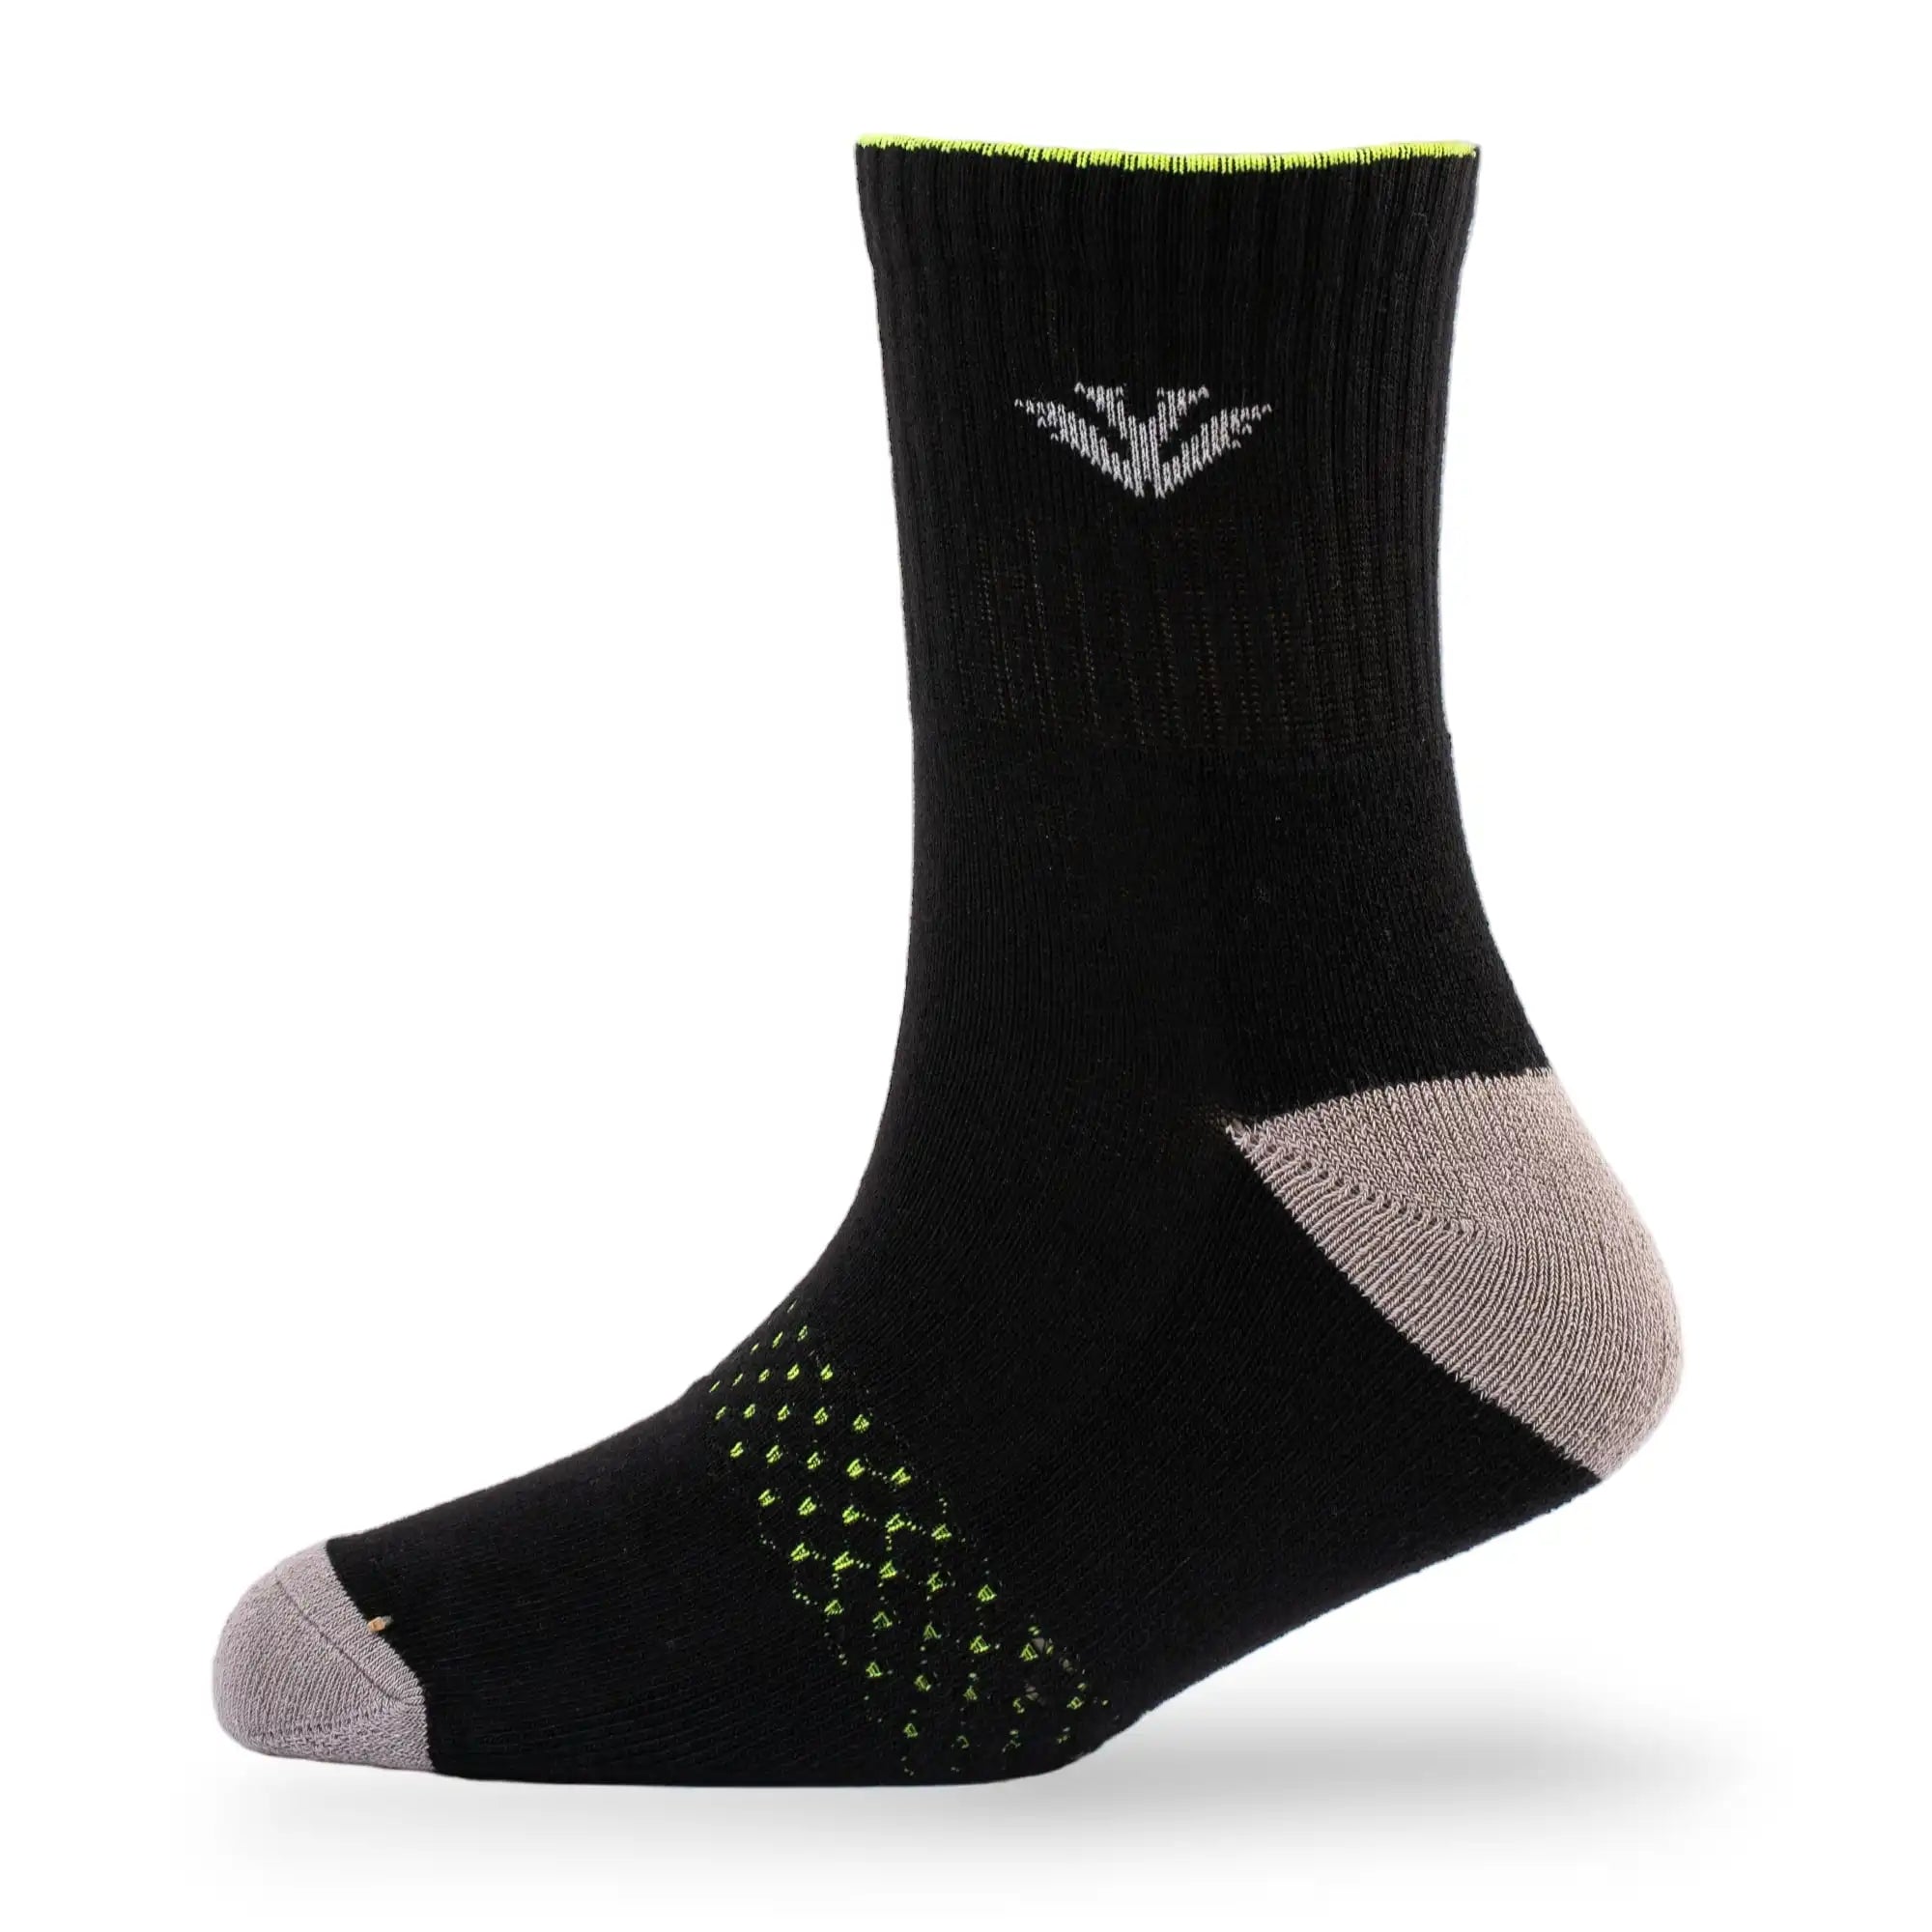 Young Wings Men's Multi Colour Cotton Fabric Design Ankle Length Socks - Pack of 3, Style no. M1-2117